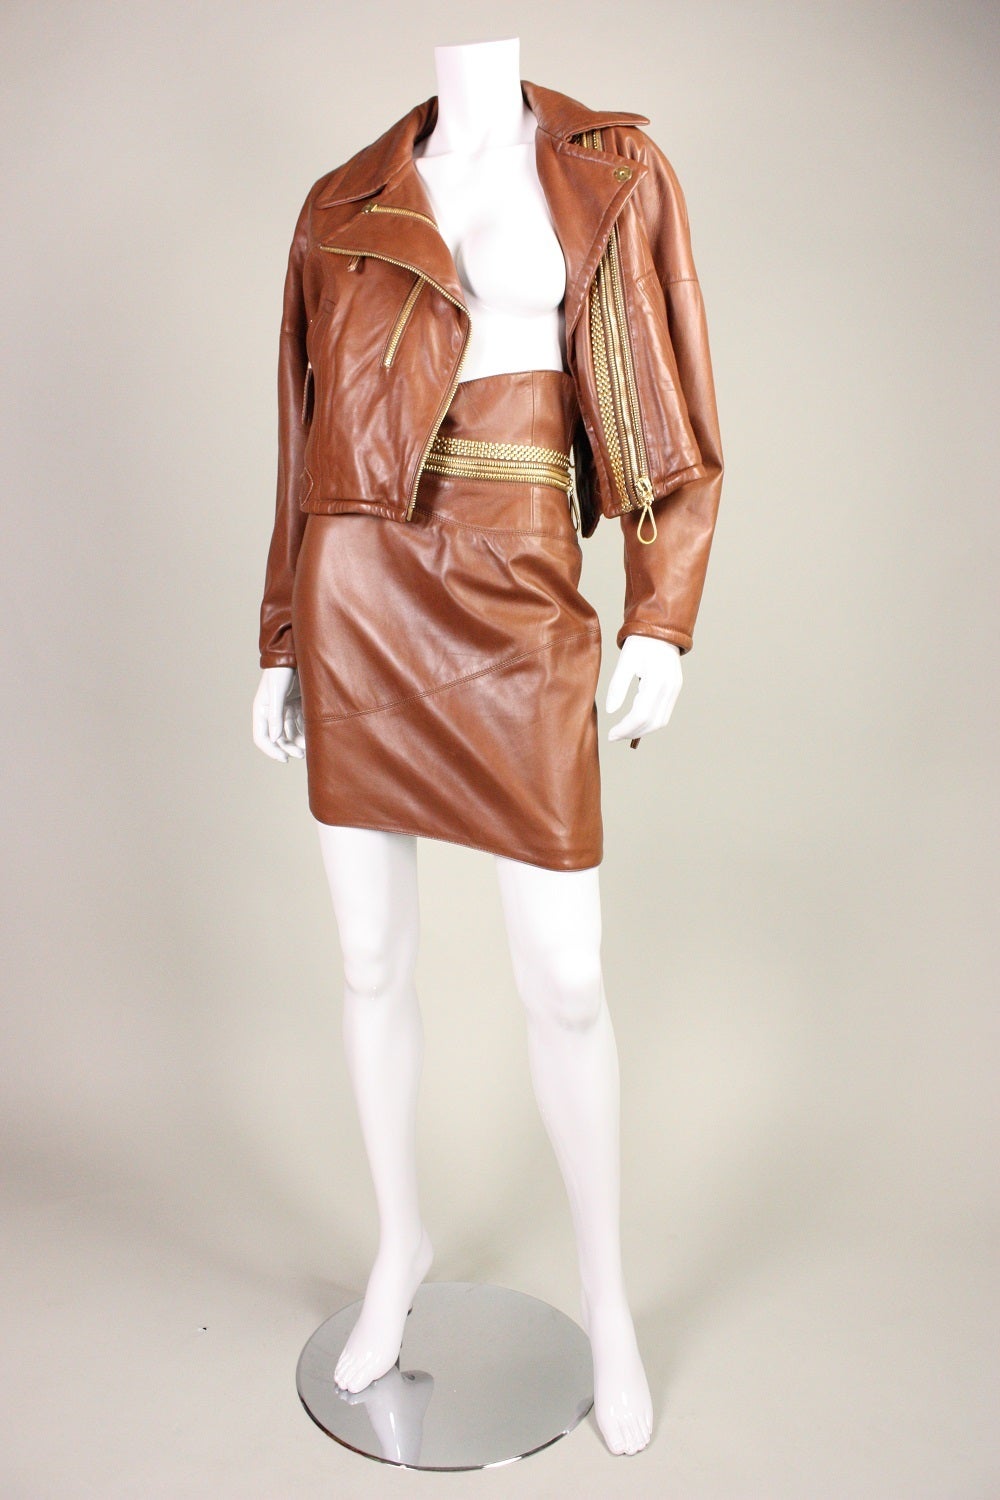 Women's Gianfranco Ferre Leather Suit with Hardware Detail For Sale